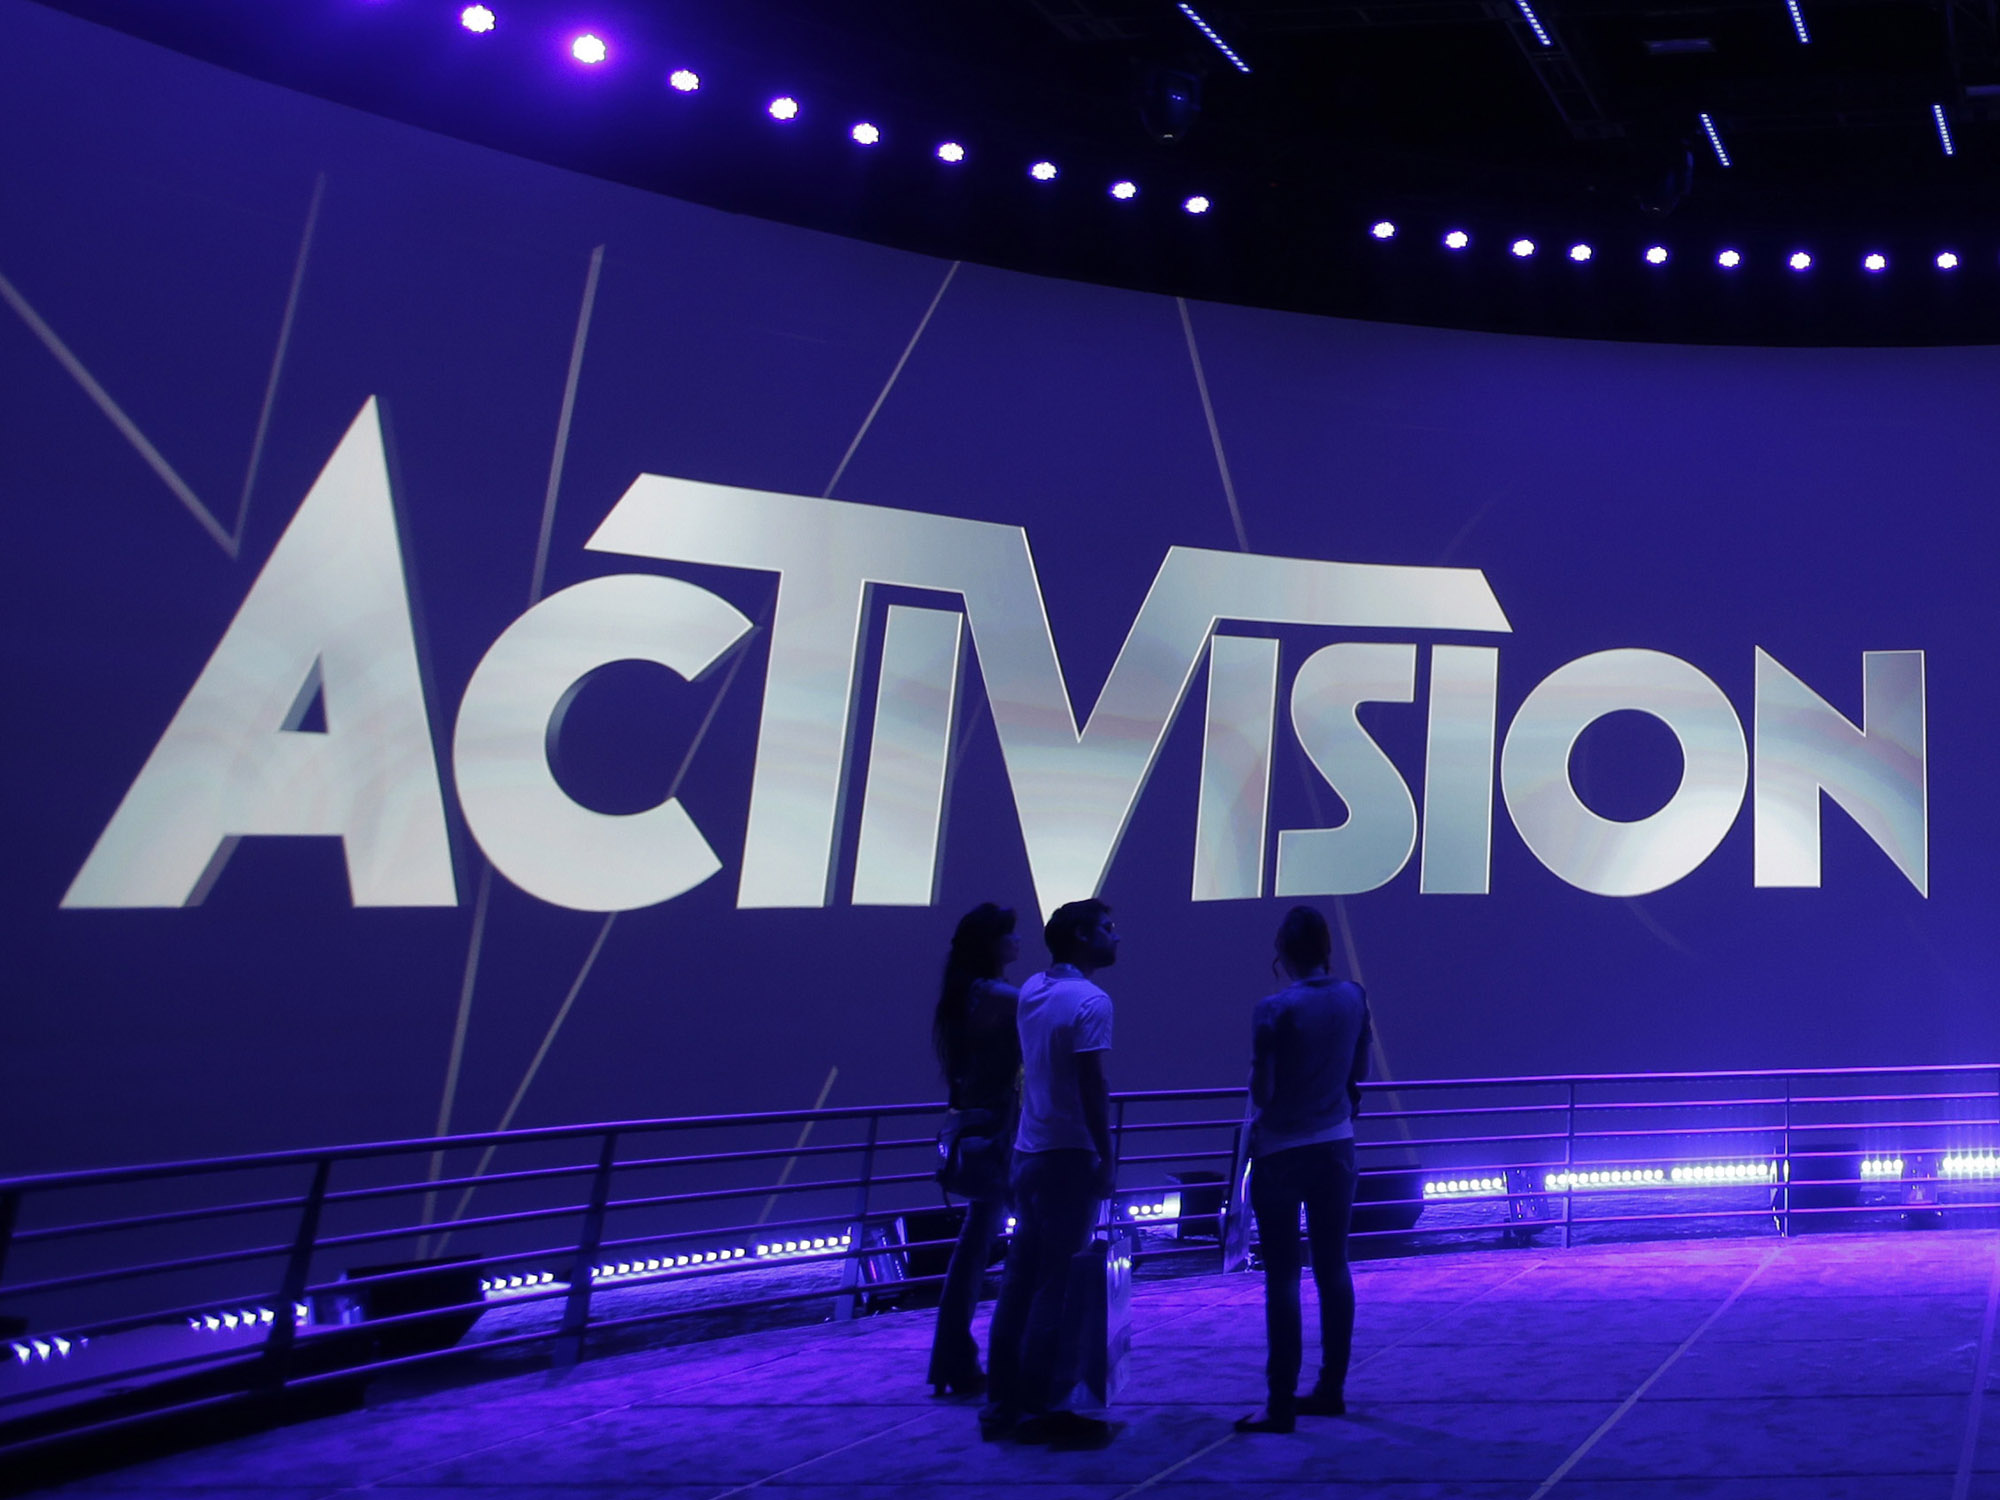 Activision Events